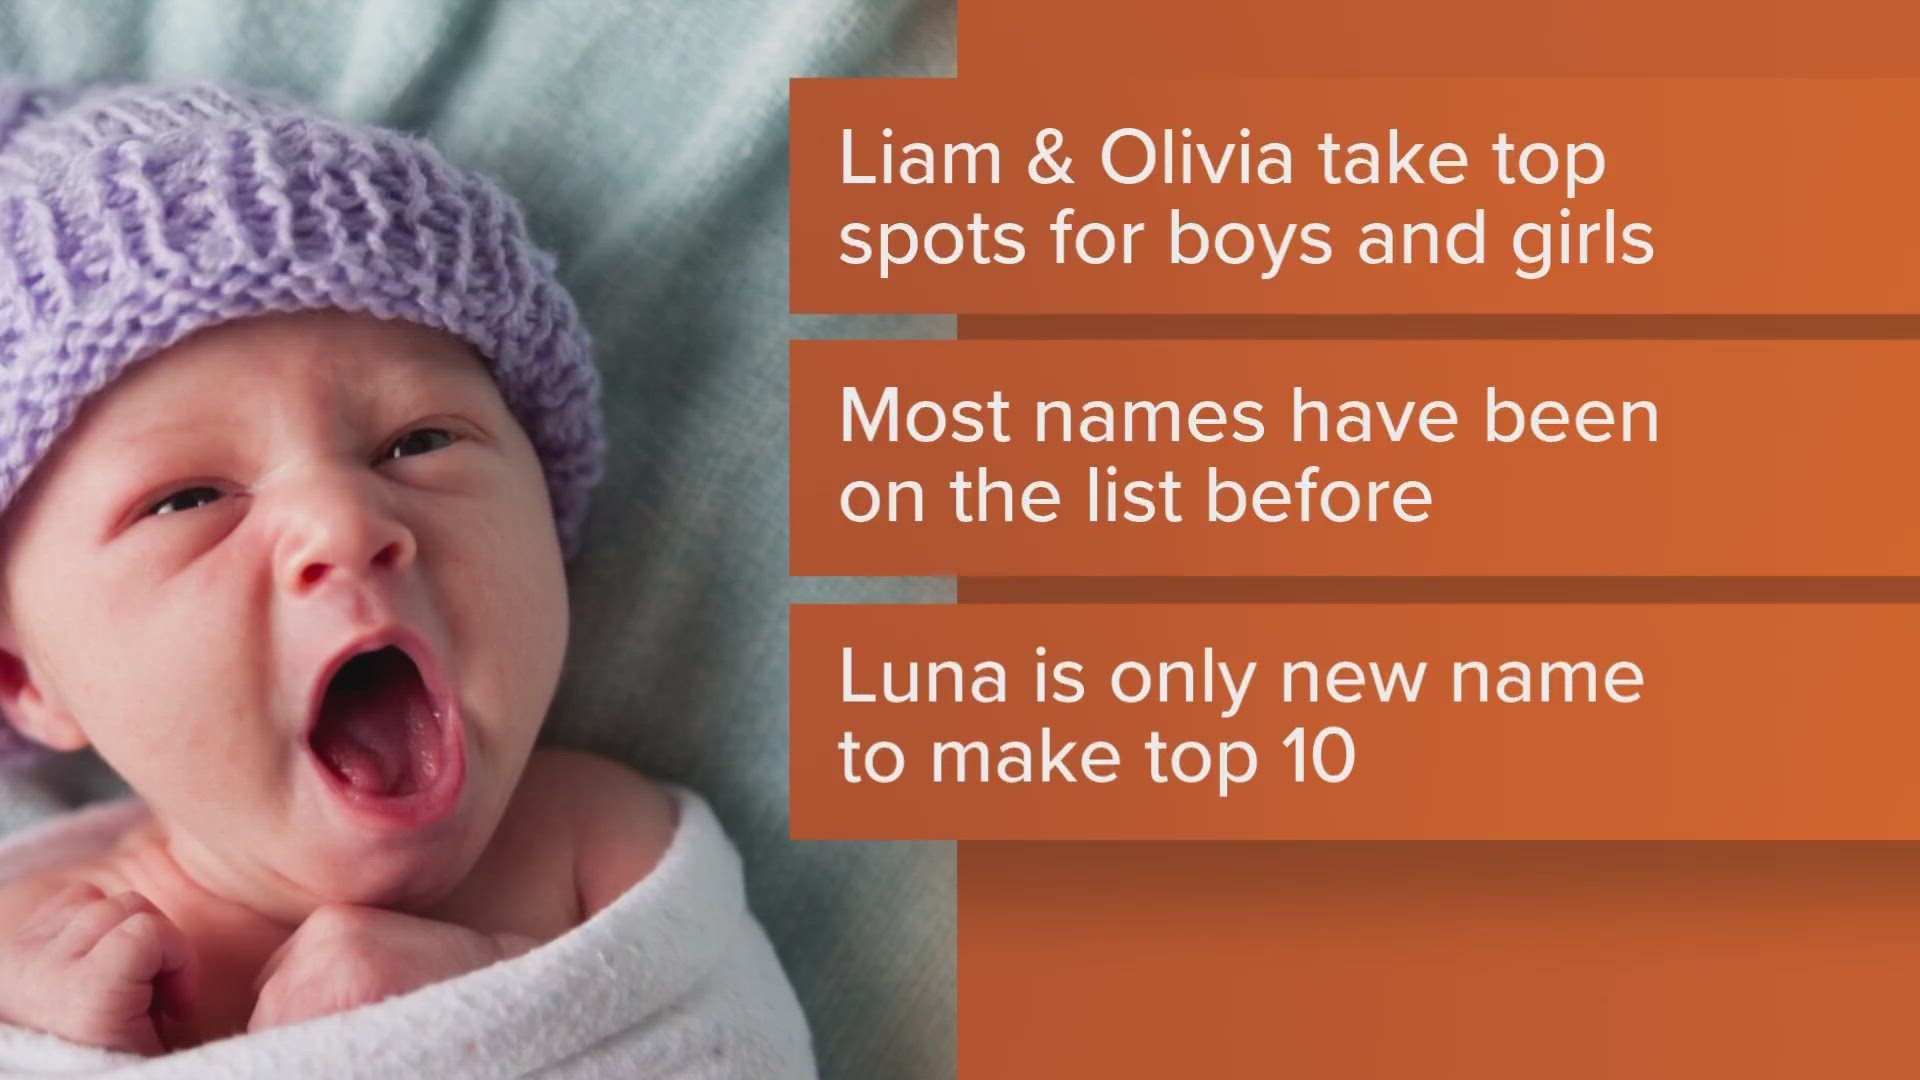 The name Luna crawled into the top ten this year.